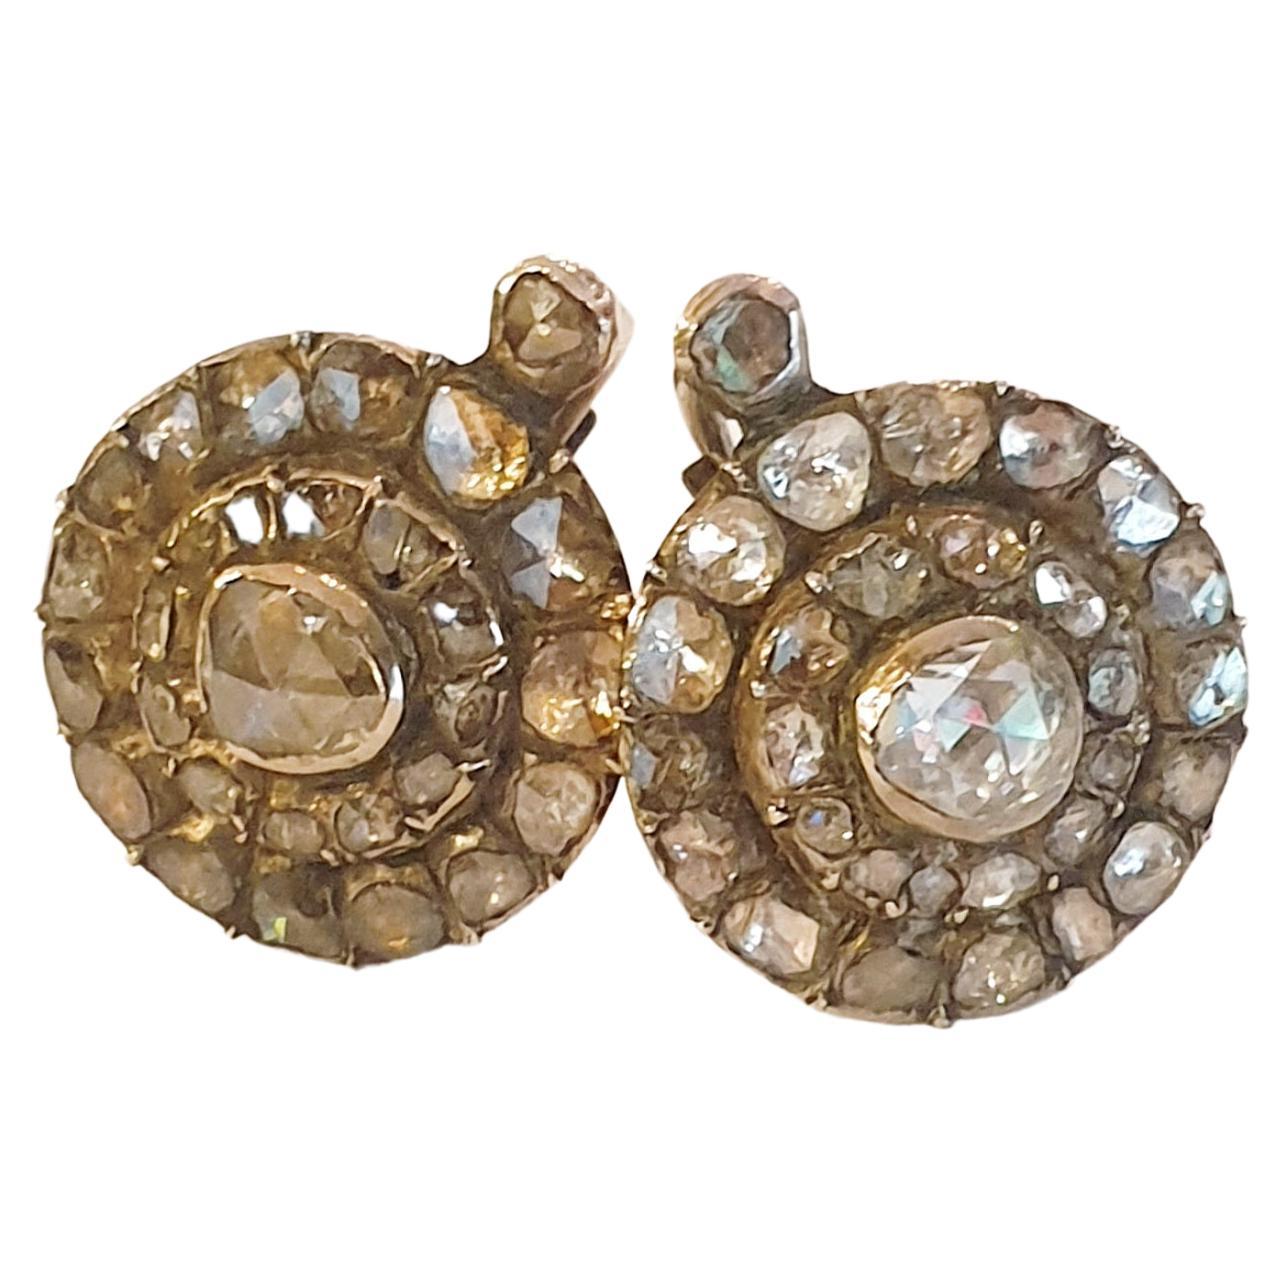 Antique victorian era 1850s earrings in 10k gold with rose cut diamonds estimate weight 1.5 carats back foiled old workmanship 